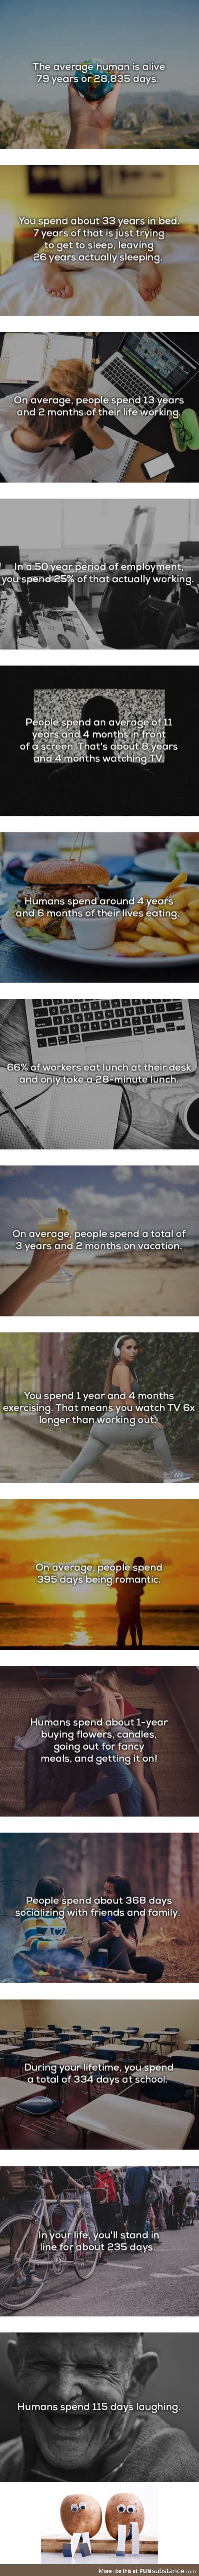 10+ interesting statistics about your life that you hardly believe they are true